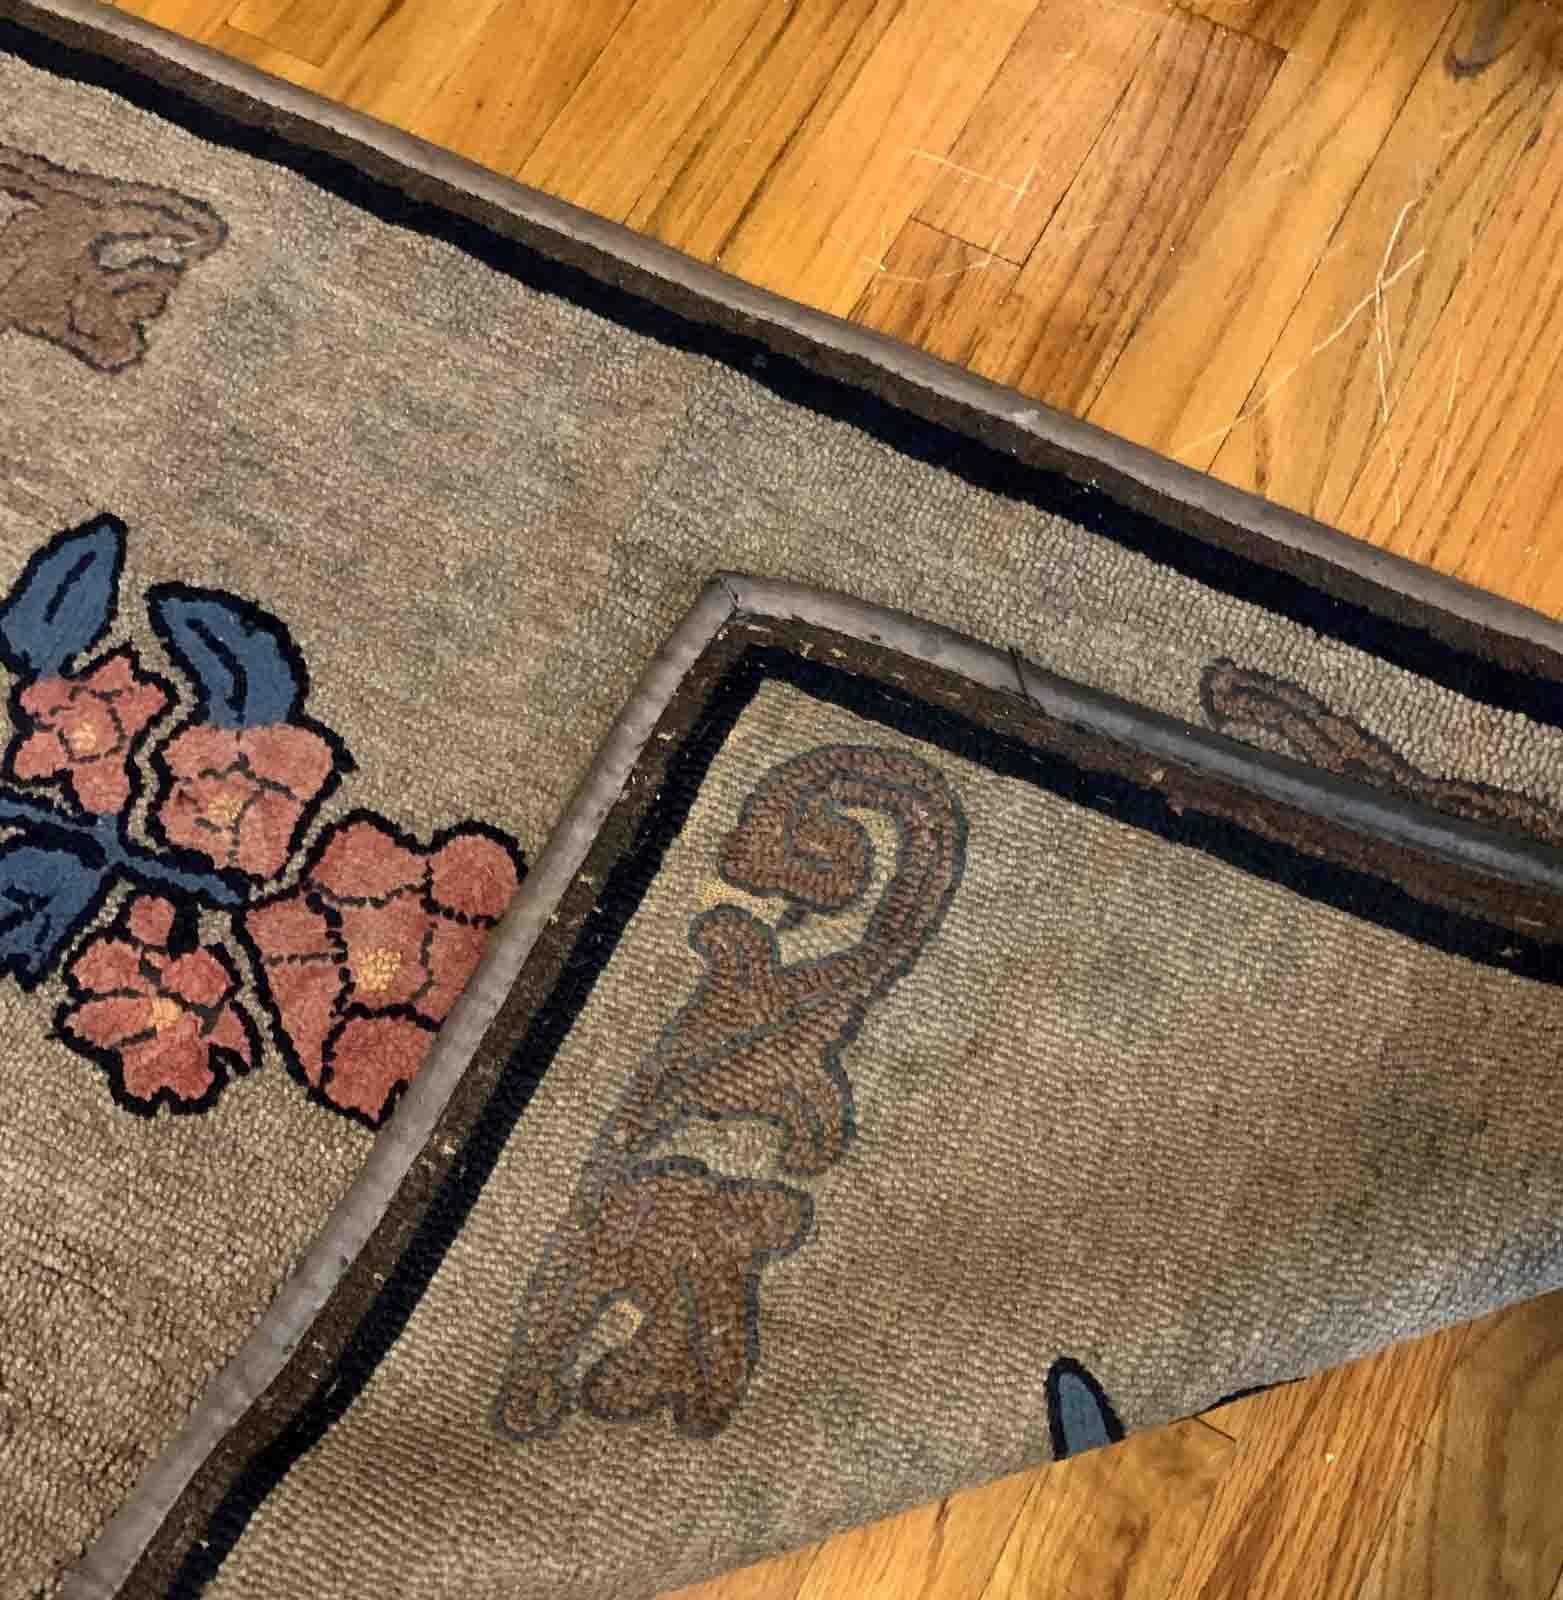 Handmade antique American Hooked rug in floral design. The rug is from the beginning of 20th century in original good condition. 

-condition: good,

-circa: 1900s,

-size: 2.3' x 4' (70cm x 122cm),
?
-material: wool,

-country of origin: